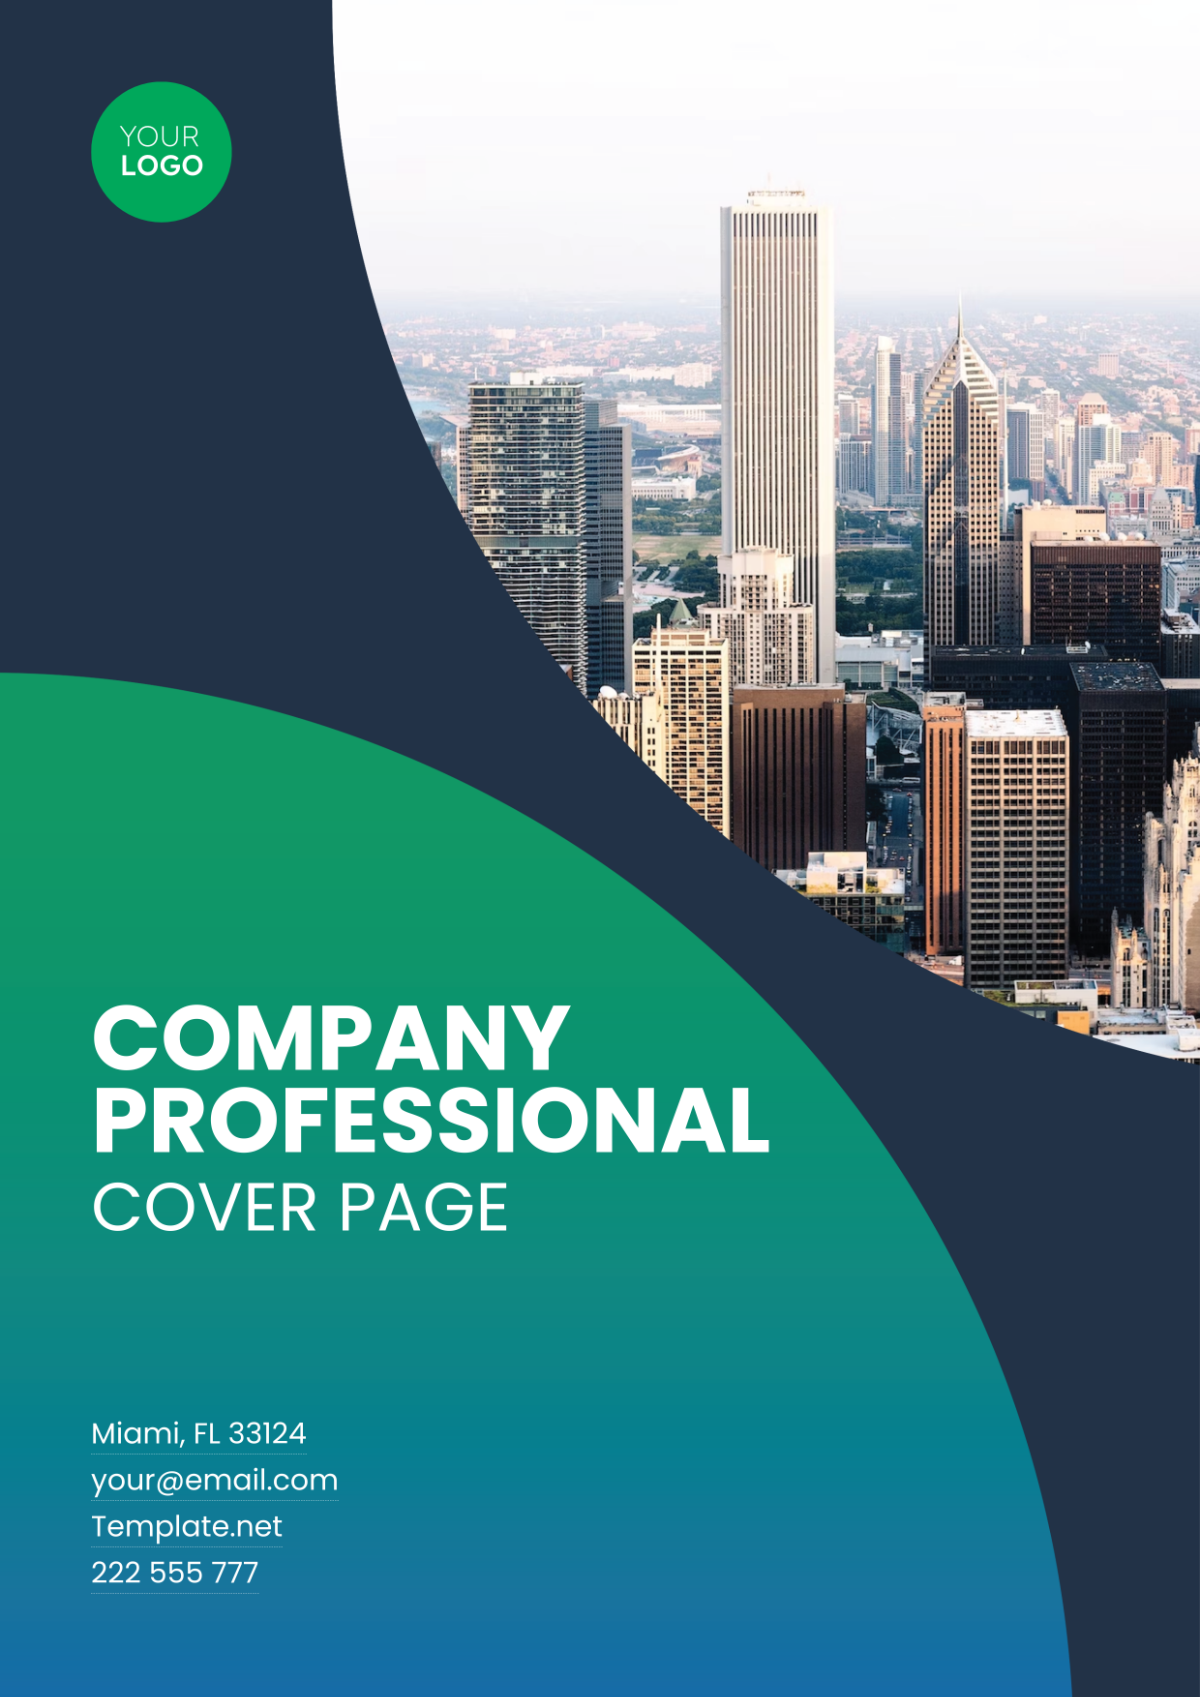 Company Professional Cover Page Template